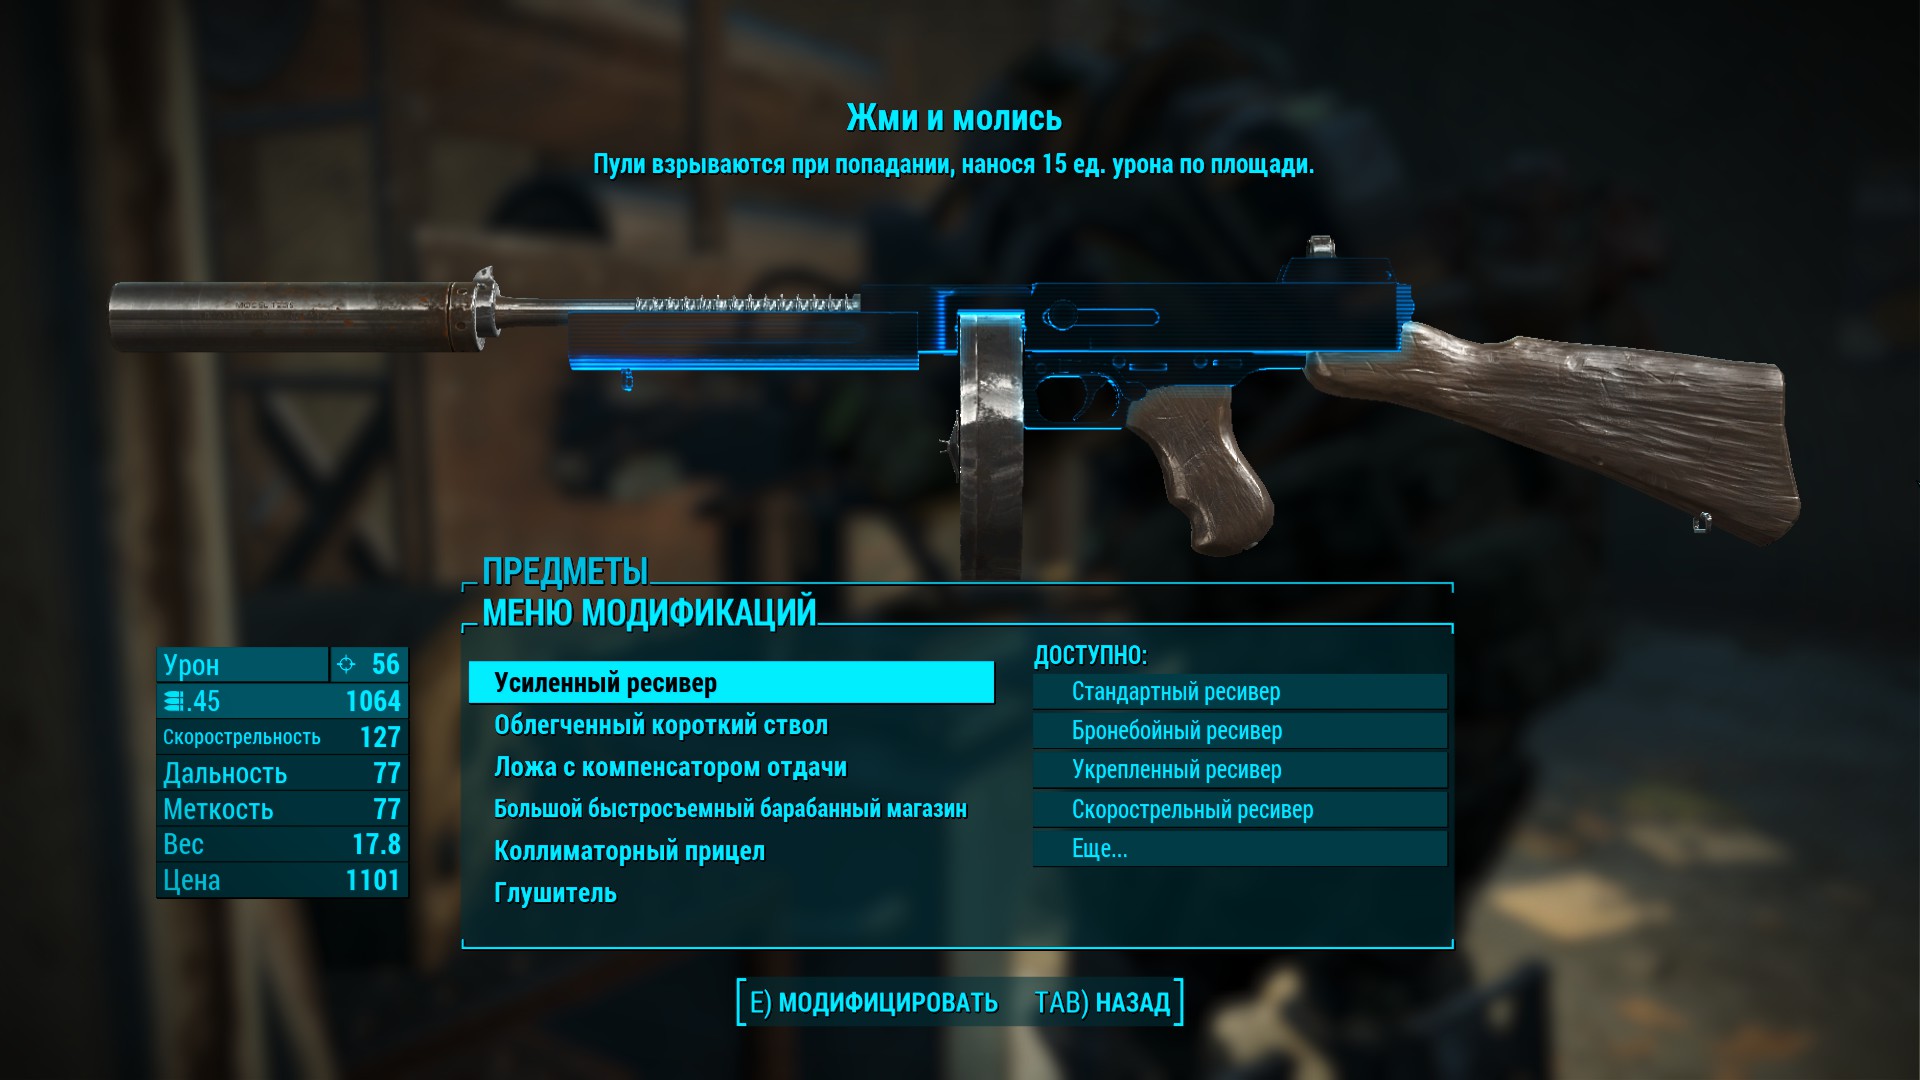 All legendary weapon fallout 4 фото 92